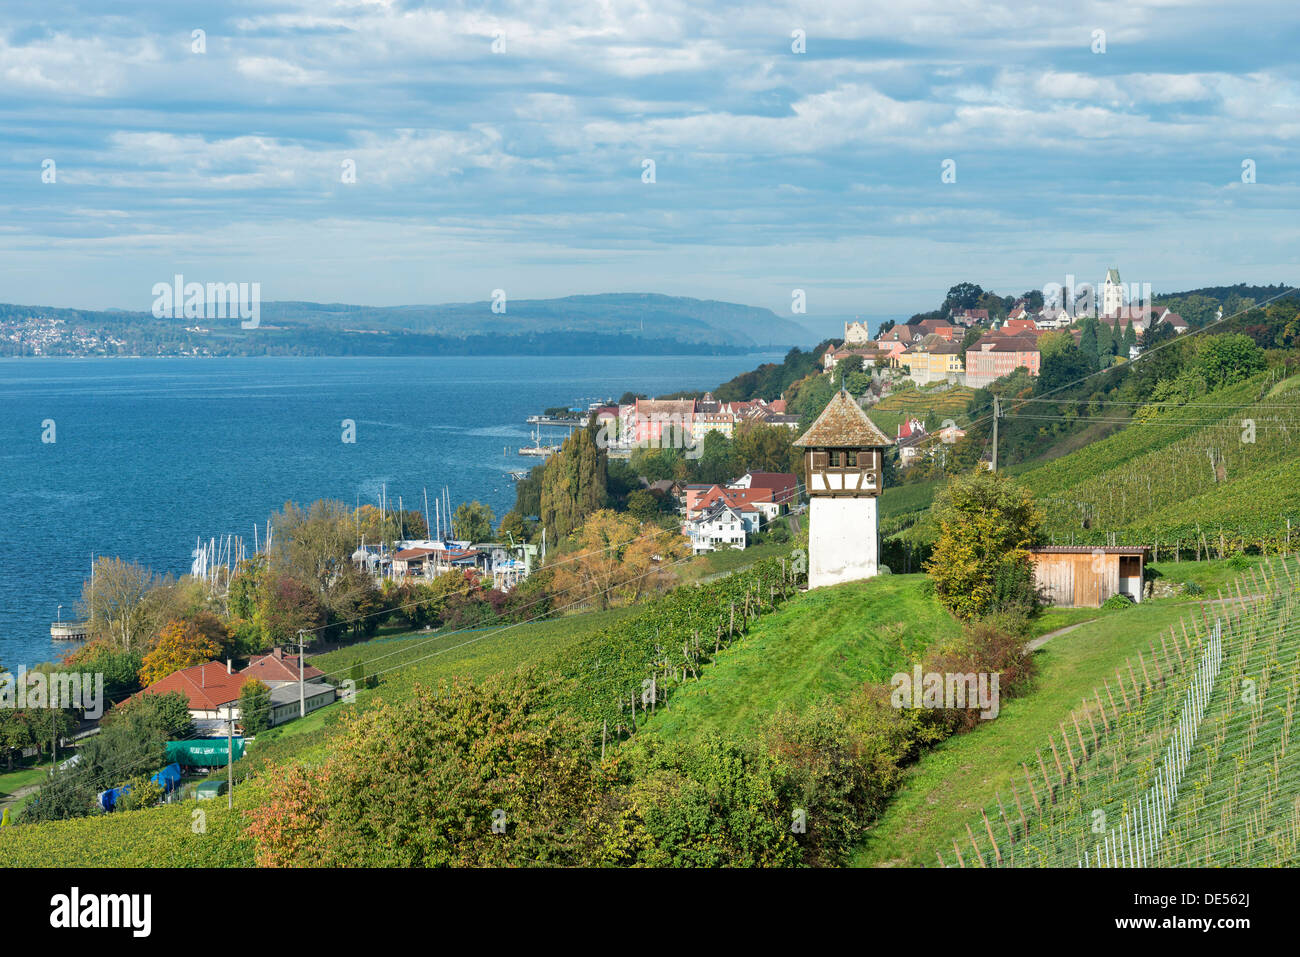 Historic Rebgut Haltnau vineyard on Lake Constance, with the town of Meersburg am Bodensee on the right, Lake Constance Stock Photo